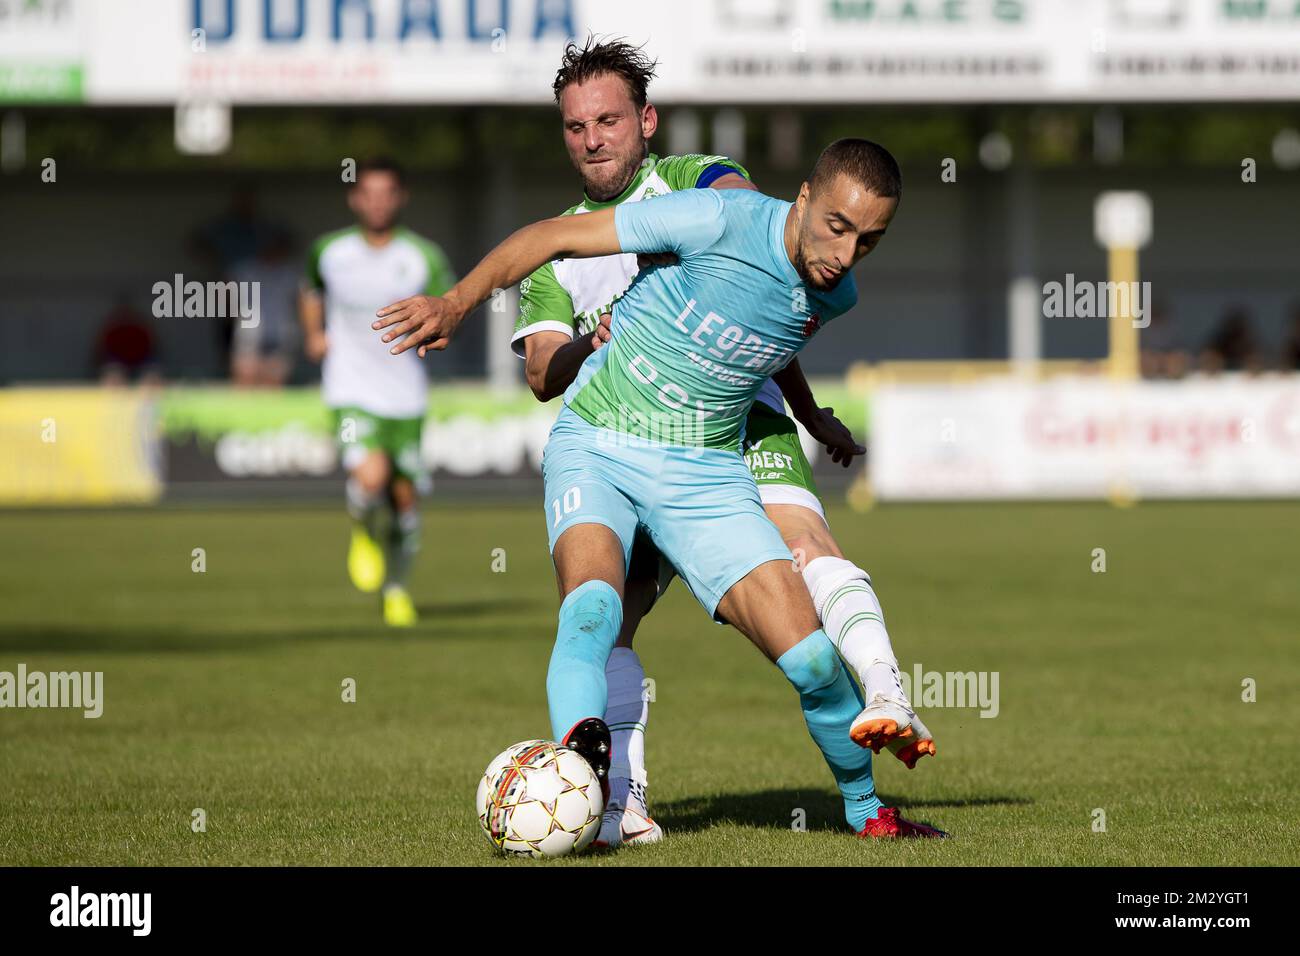 Dessel's Kevin Janssens and Virton's Mehdi Lazaar fight for the ball during a soccer game between Dessel Sport (First amateur division) and Royal Excelsior Virton (1b 2nd division), Saturday 24 August 2019 in Dessel, in the fifth round of the 'Croky Cup' Belgian cup. BELGA PHOTO KRISTOF VAN ACCOM Stock Photo